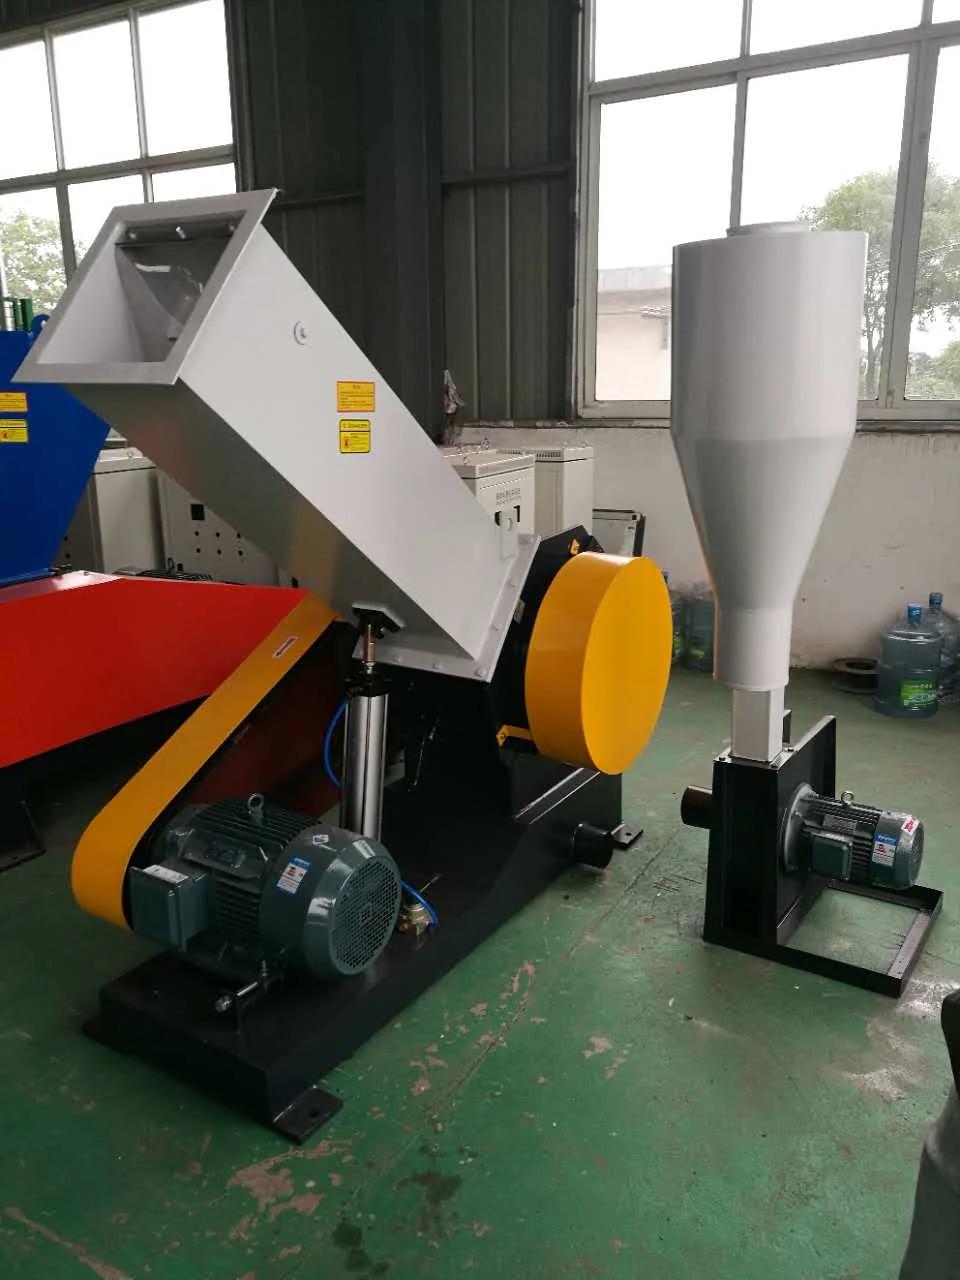 Crusher for Pipe Plastic Washing Machine Feeding Mouth Is Equipped with Curtain